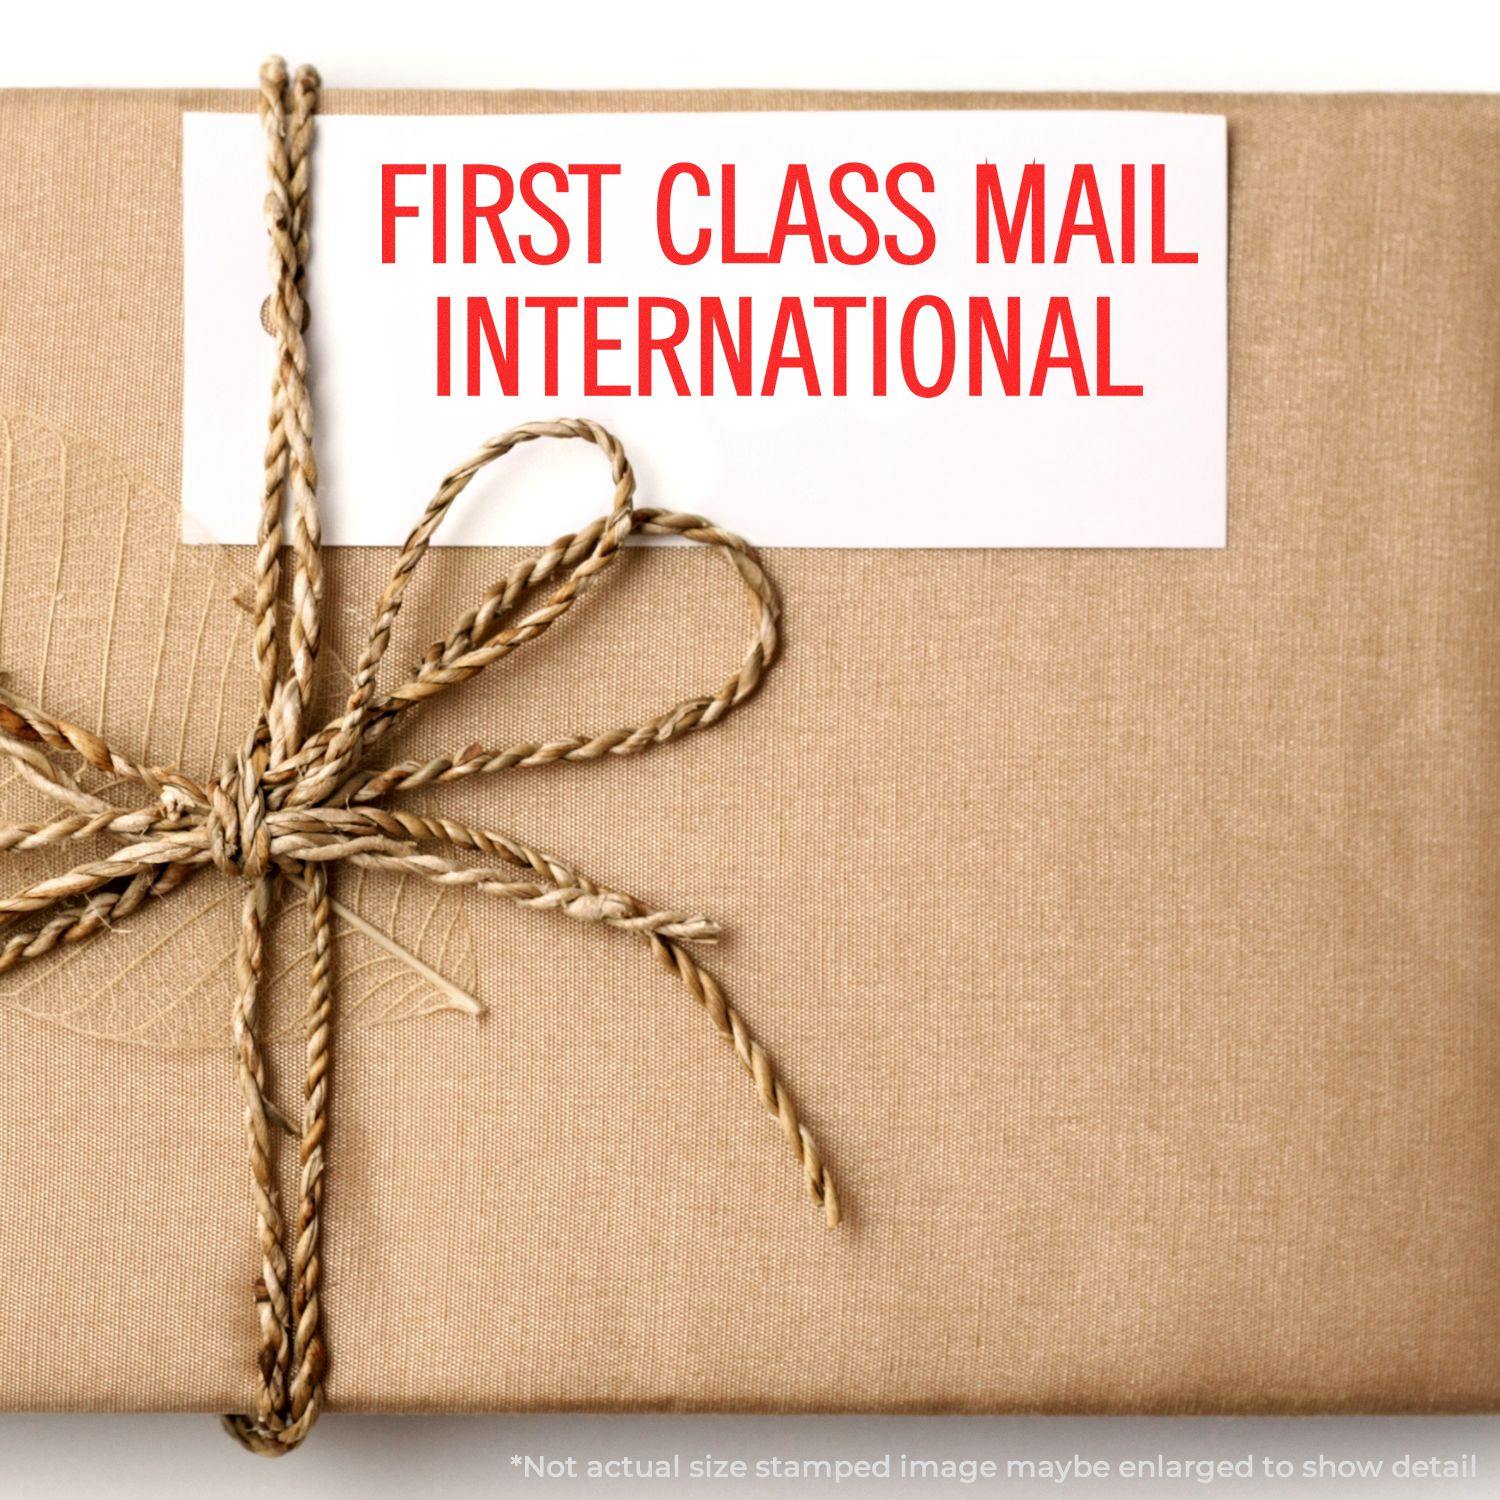 In Use Large Pre-Inked First Class Mail International Stamp Image